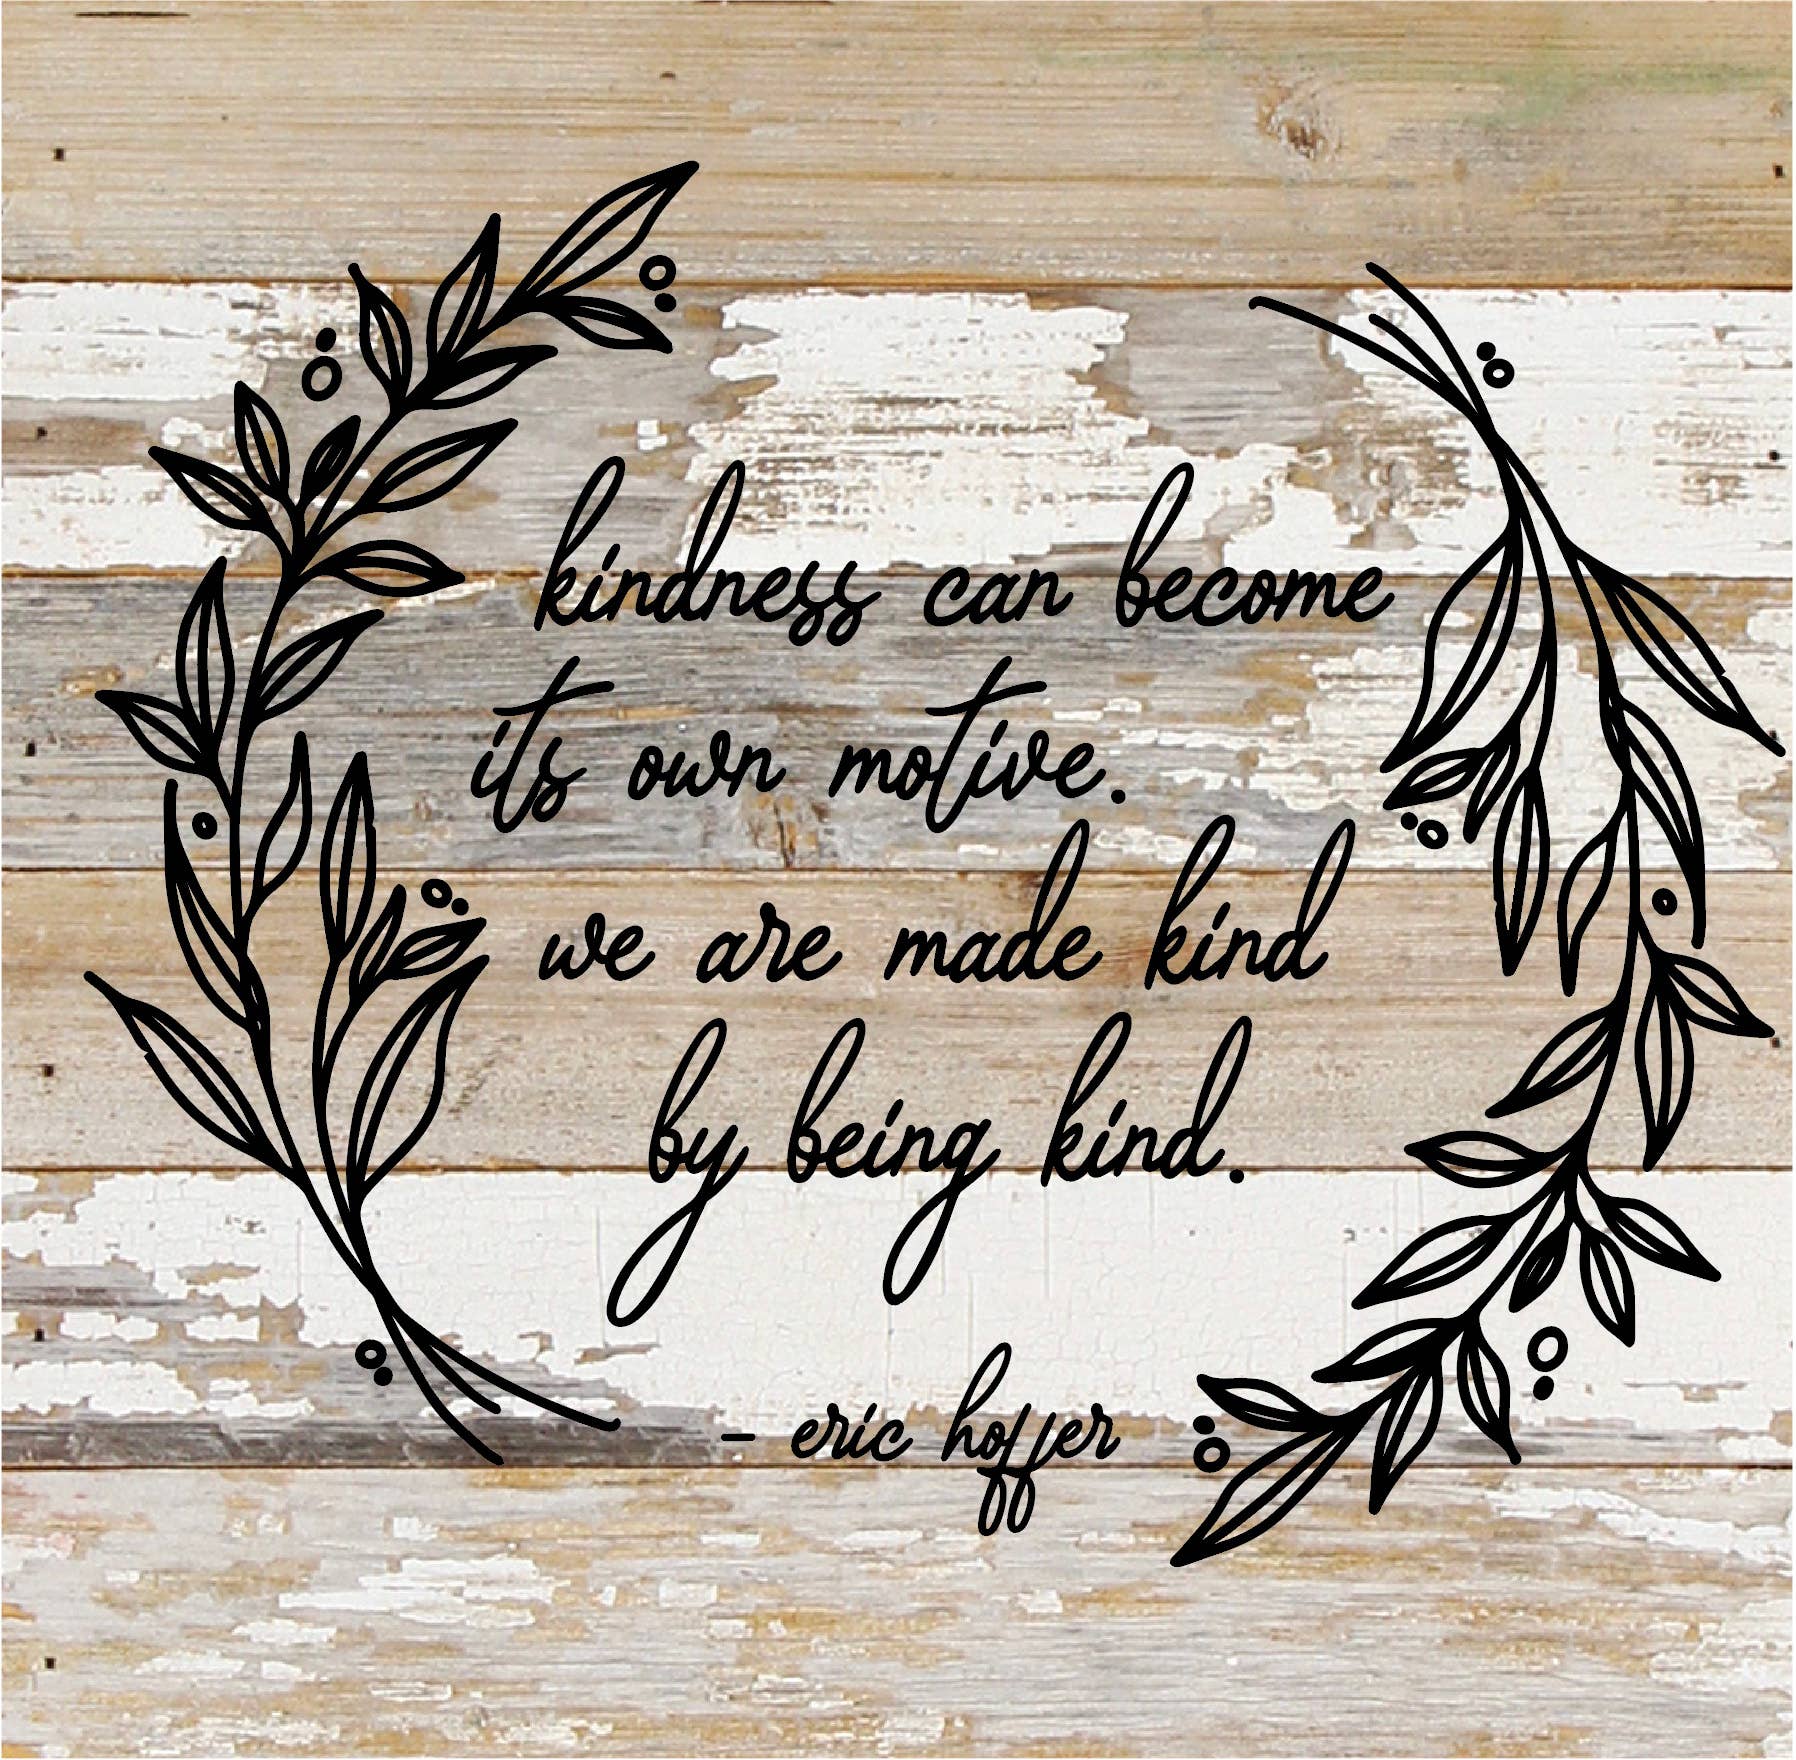 Kindness can become its own motive we are made kind by being kind - eric hoffer / 28"X28" Reclaimed Wood Sign